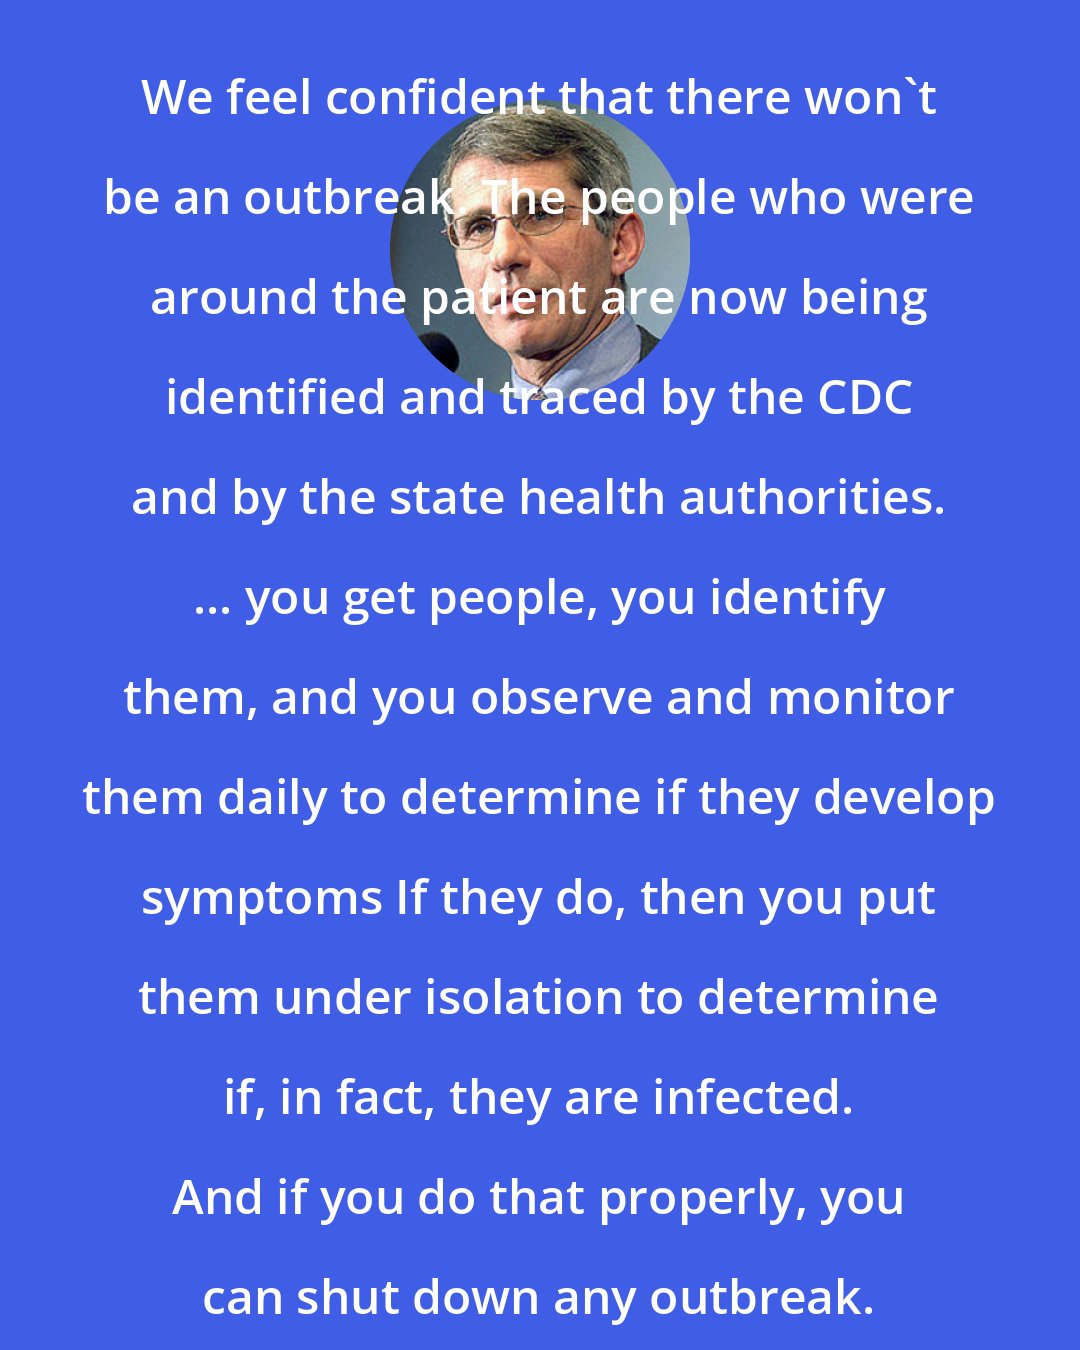 Anthony S. Fauci: We feel confident that there won't be an outbreak. The people who were around the patient are now being identified and traced by the CDC and by the state health authorities. ... you get people, you identify them, and you observe and monitor them daily to determine if they develop symptoms If they do, then you put them under isolation to determine if, in fact, they are infected. And if you do that properly, you can shut down any outbreak.